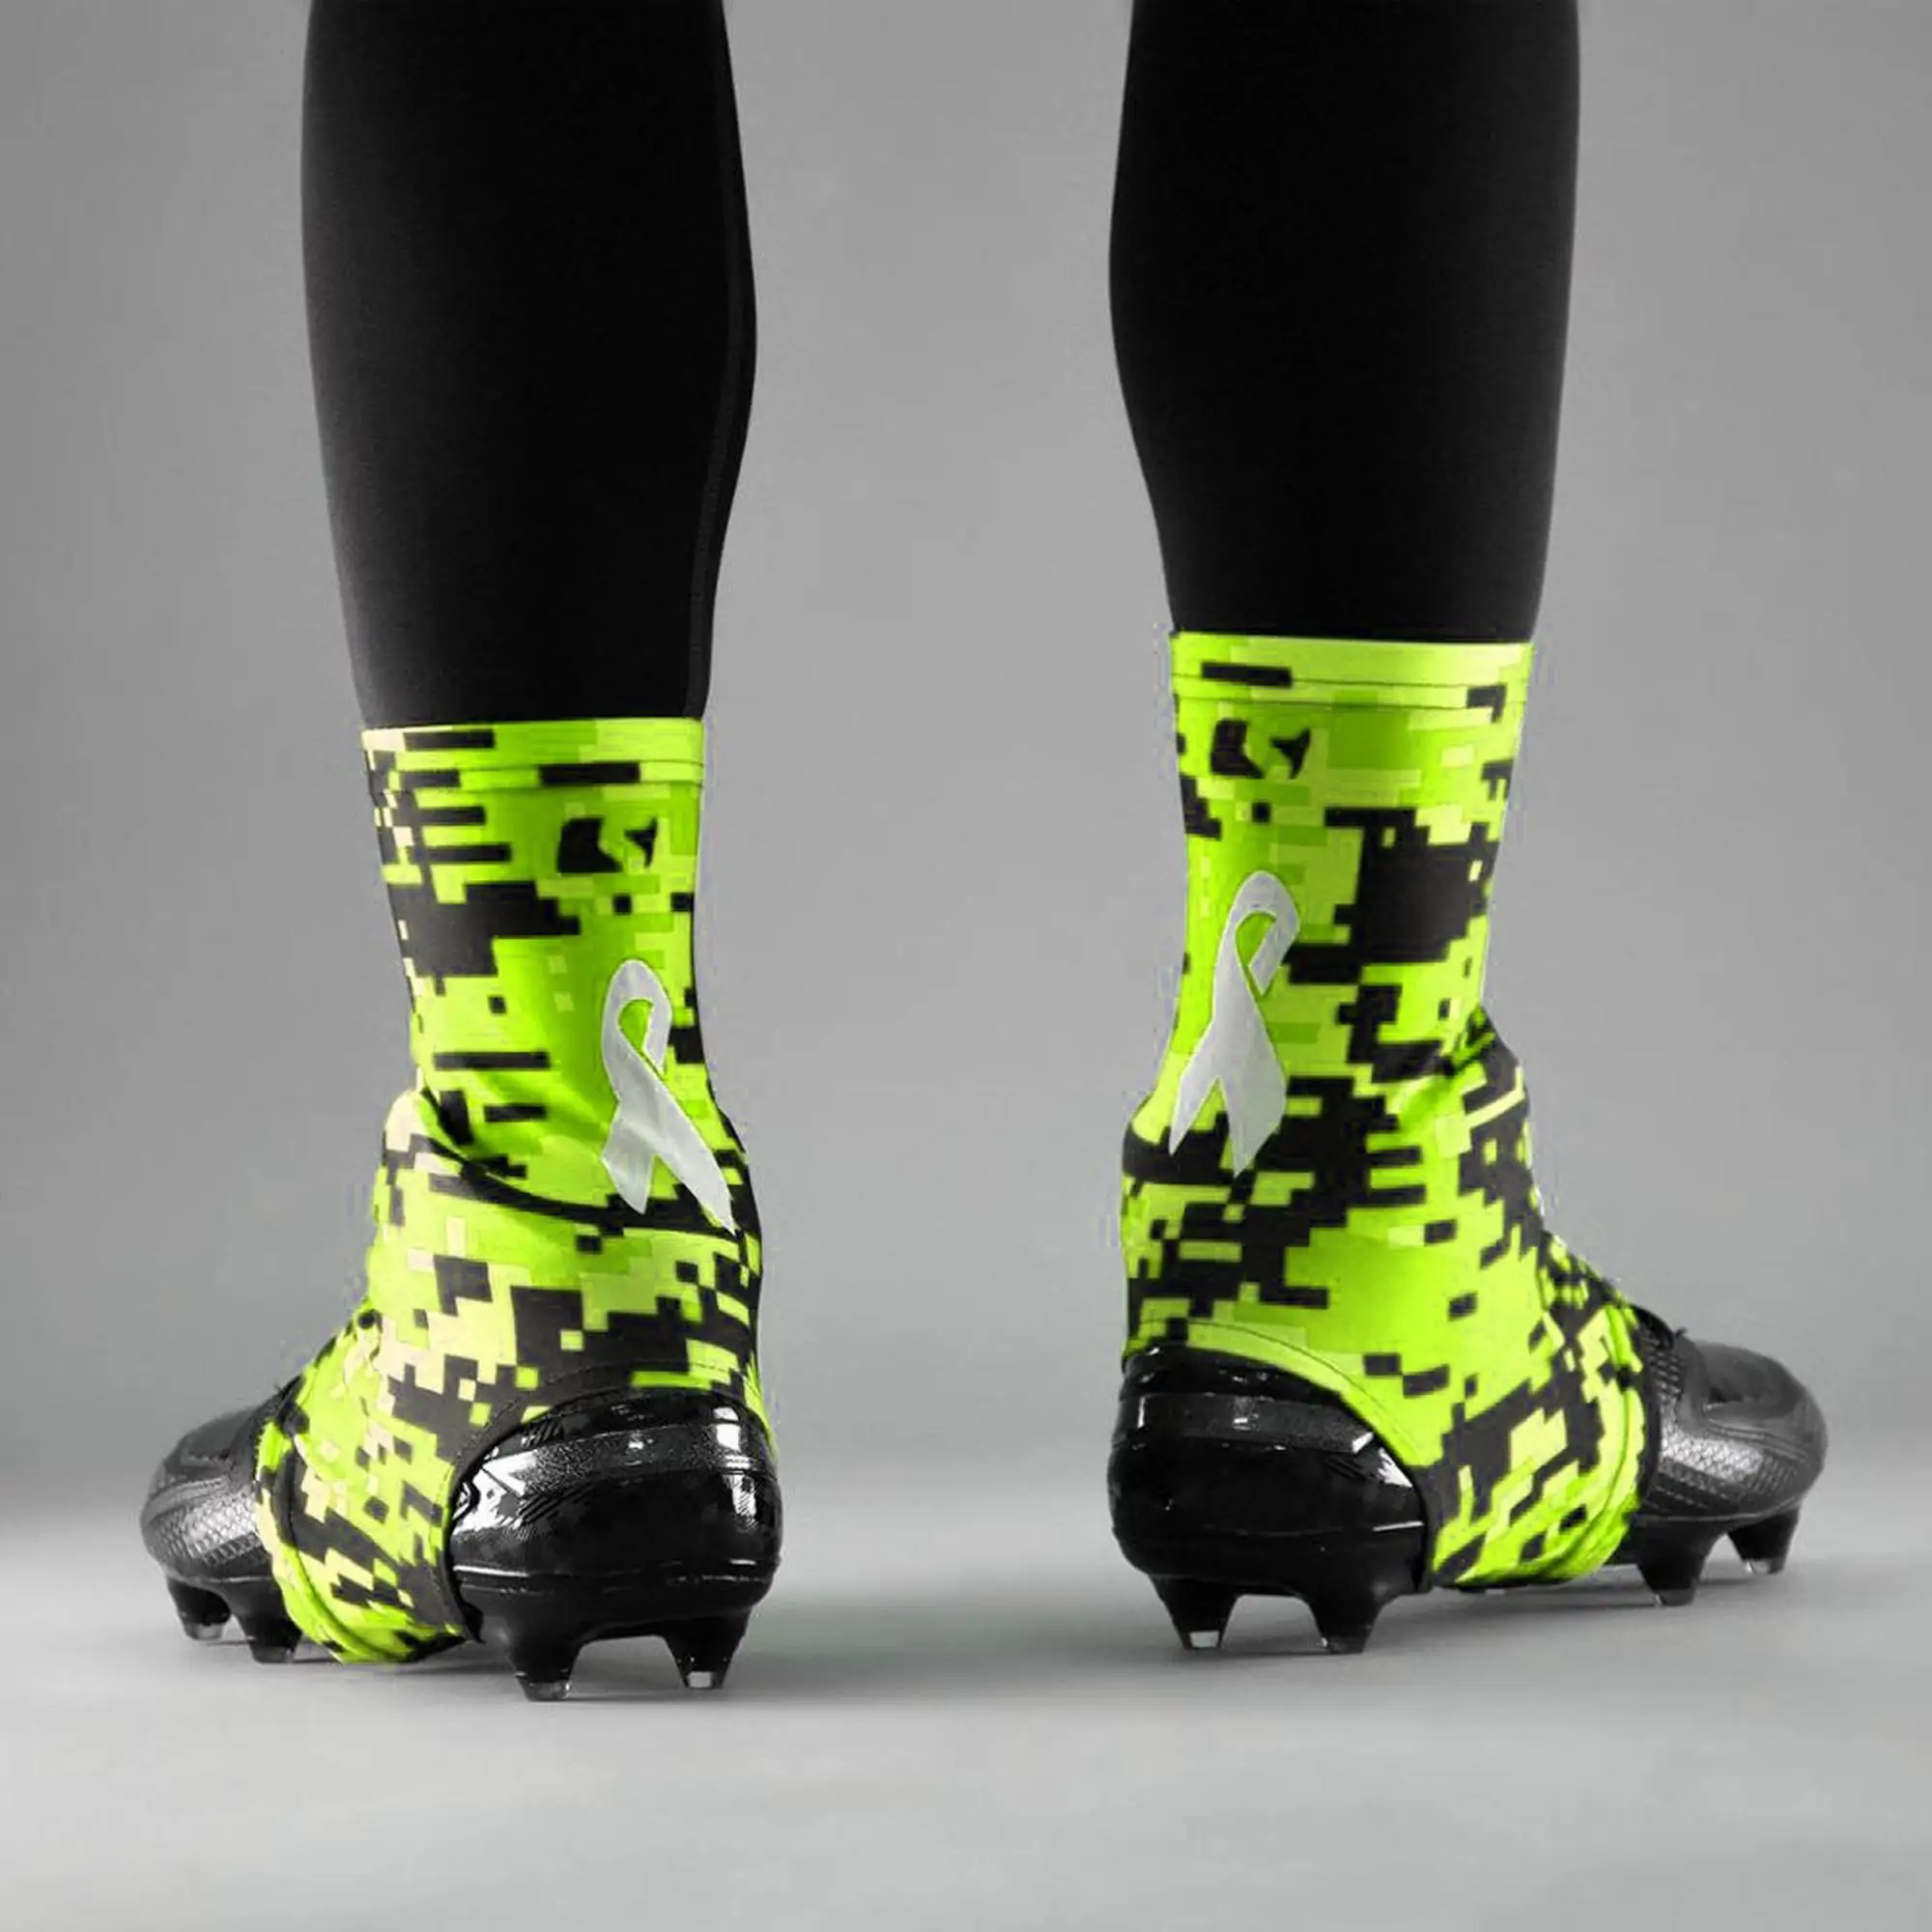 spatted cleats